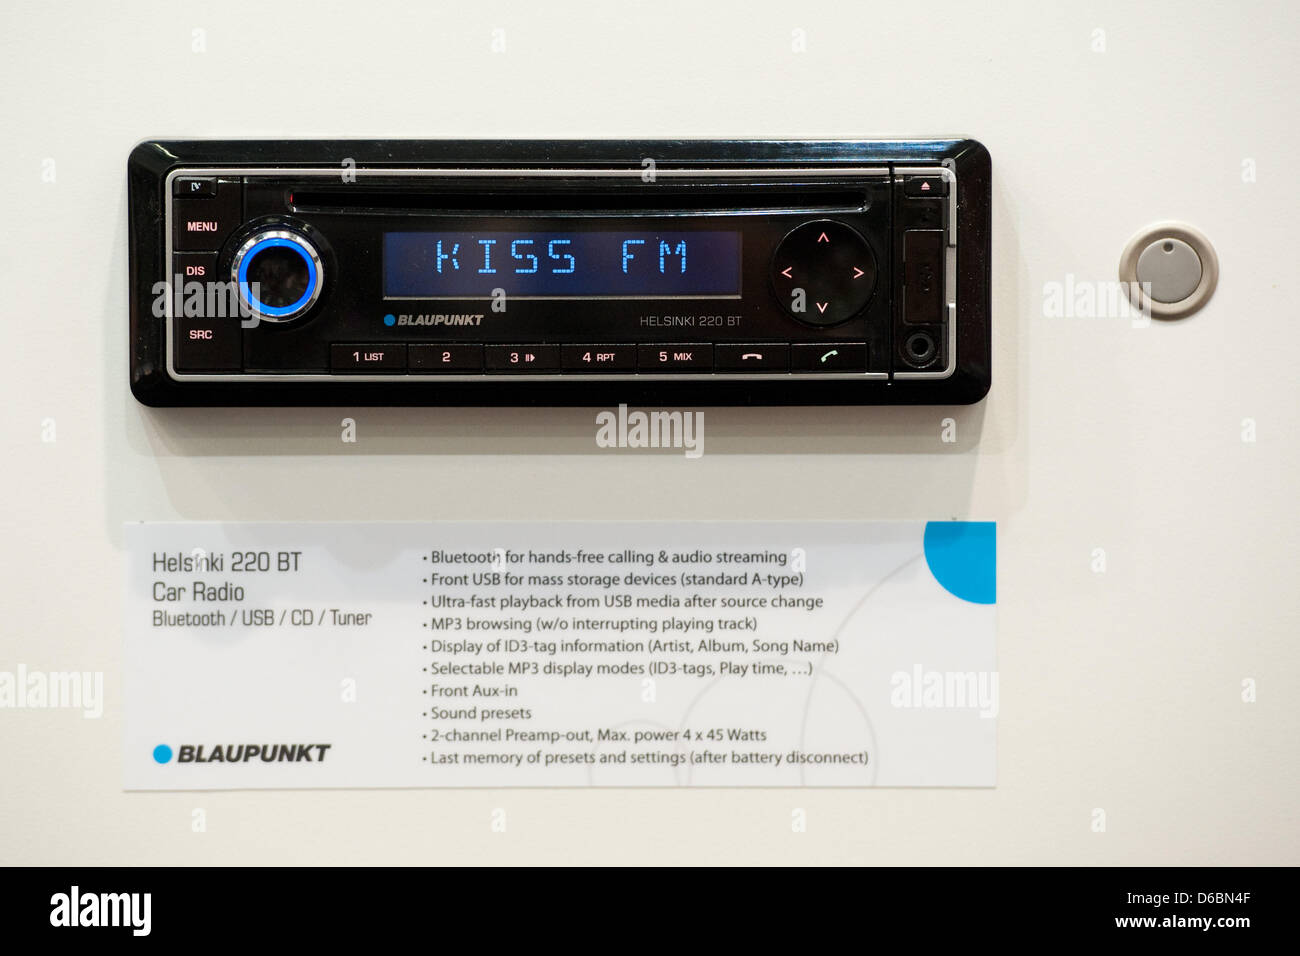 Car radio 'Helsinki 220 BT' by German electronics manufacturer Blaupunkt is  on display at the consumer electronics and home appliances trade show IFA (International  radio exhibition Berlin, aka 'Berlin Radio Show') in